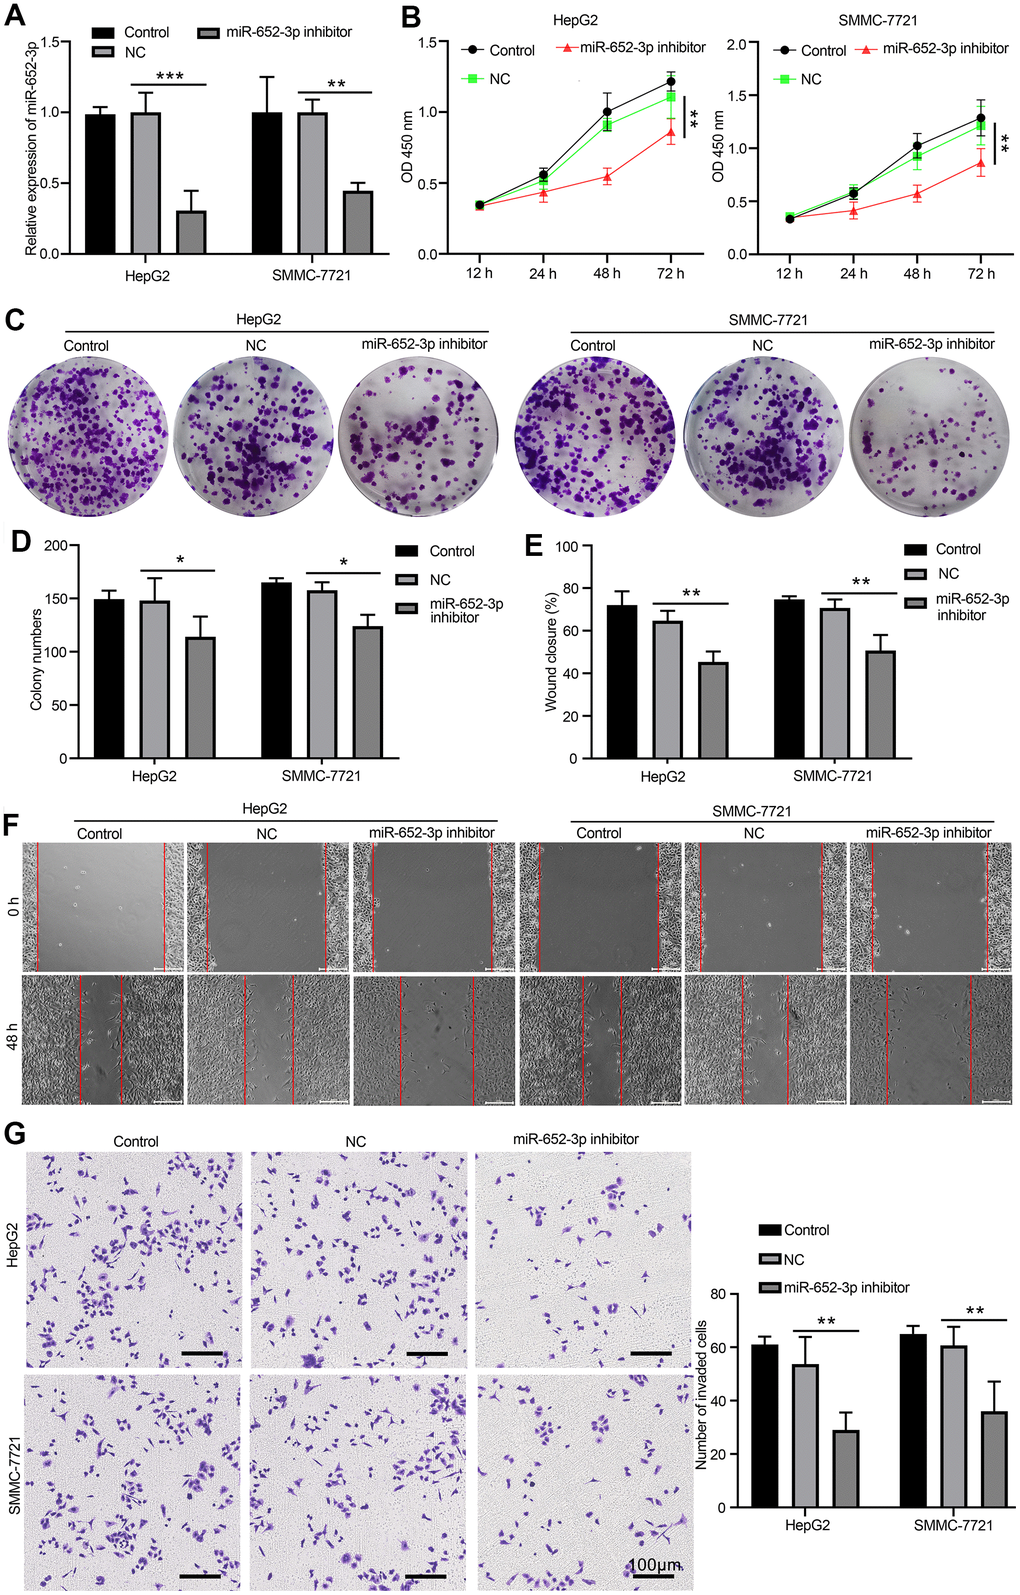 Inhibit miR-652-3p attenuates the proliferation and metastasis of HCC cells after co-culturing with BMSCs. (A) Expression of miR-652-3p was detected in HepG2 and SMMC-7721 cells co-culturing with BMSCs or hypo-BMSCs by using qPCR assay. Data were presented as the mean ± SD, and analyzed with Student’s t-test. **P B) Cell growth curves in HepG2 and SMMC-7721 cells transfected with different combinations. Data were presented as the mean ± SD, and analyzed with Student’s t-test. *P C) Colony formation assays showed that the proliferation rate was decreased in HepG2 and SMMC-7721 cells after treat isolated exosome hypo-BMSCs-derived with miR-652-3p inhibitor. (D) The numbers of colony were counted from six fields of view in each group. Data were presented as the mean ± SD, and analyzed with Student’s t-test. *P E) The distance of migration was measured from six fields of view in each group. Data were presented as the mean ± SD, and analyzed with Student’s t-test. *P F) The numbers of dot violet were counted from six fields of view in each group. Data were presented as the mean ± SD, and analyzed with Student’s t-test. *P G) Cell invasion were measured by transwell assays. HepG2 and SMMC-7721 cells co-culturing with isolated exosome hypo-BMSCs-derived with miR-652-3p inhibitor treat for 48 h. Cells that invaded to the bottom surface were stained with crystal violet and observed by light microscopy (magnification, 100×).